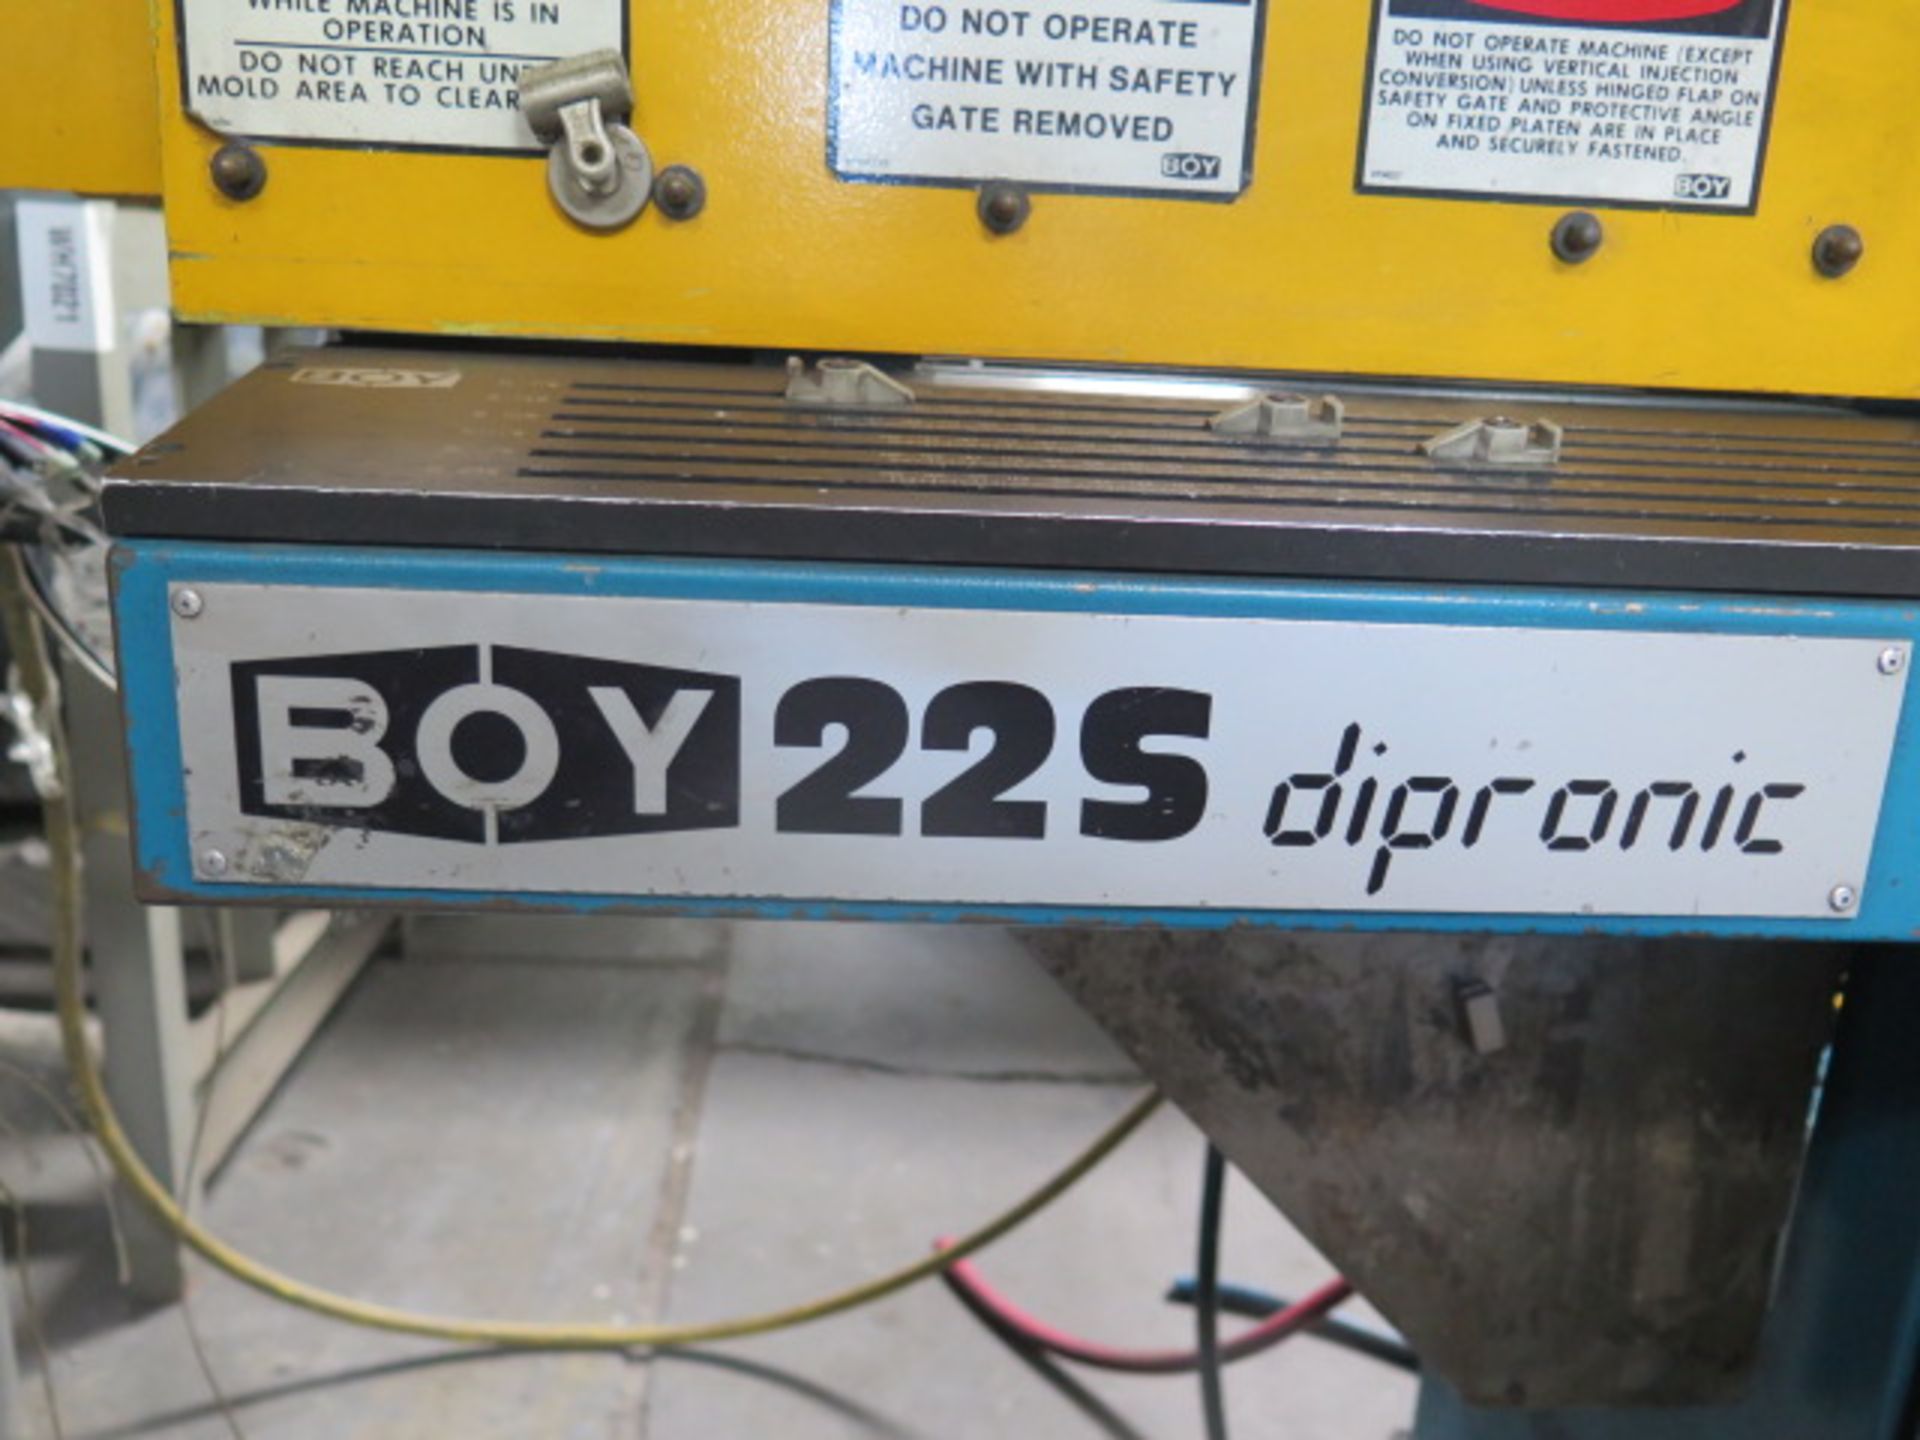 1990 Boy 22M 24 Ton Plastic Injection Molding Machine s/n 21334 w/ Boy Controls, SOLD AS IS - Image 11 of 12